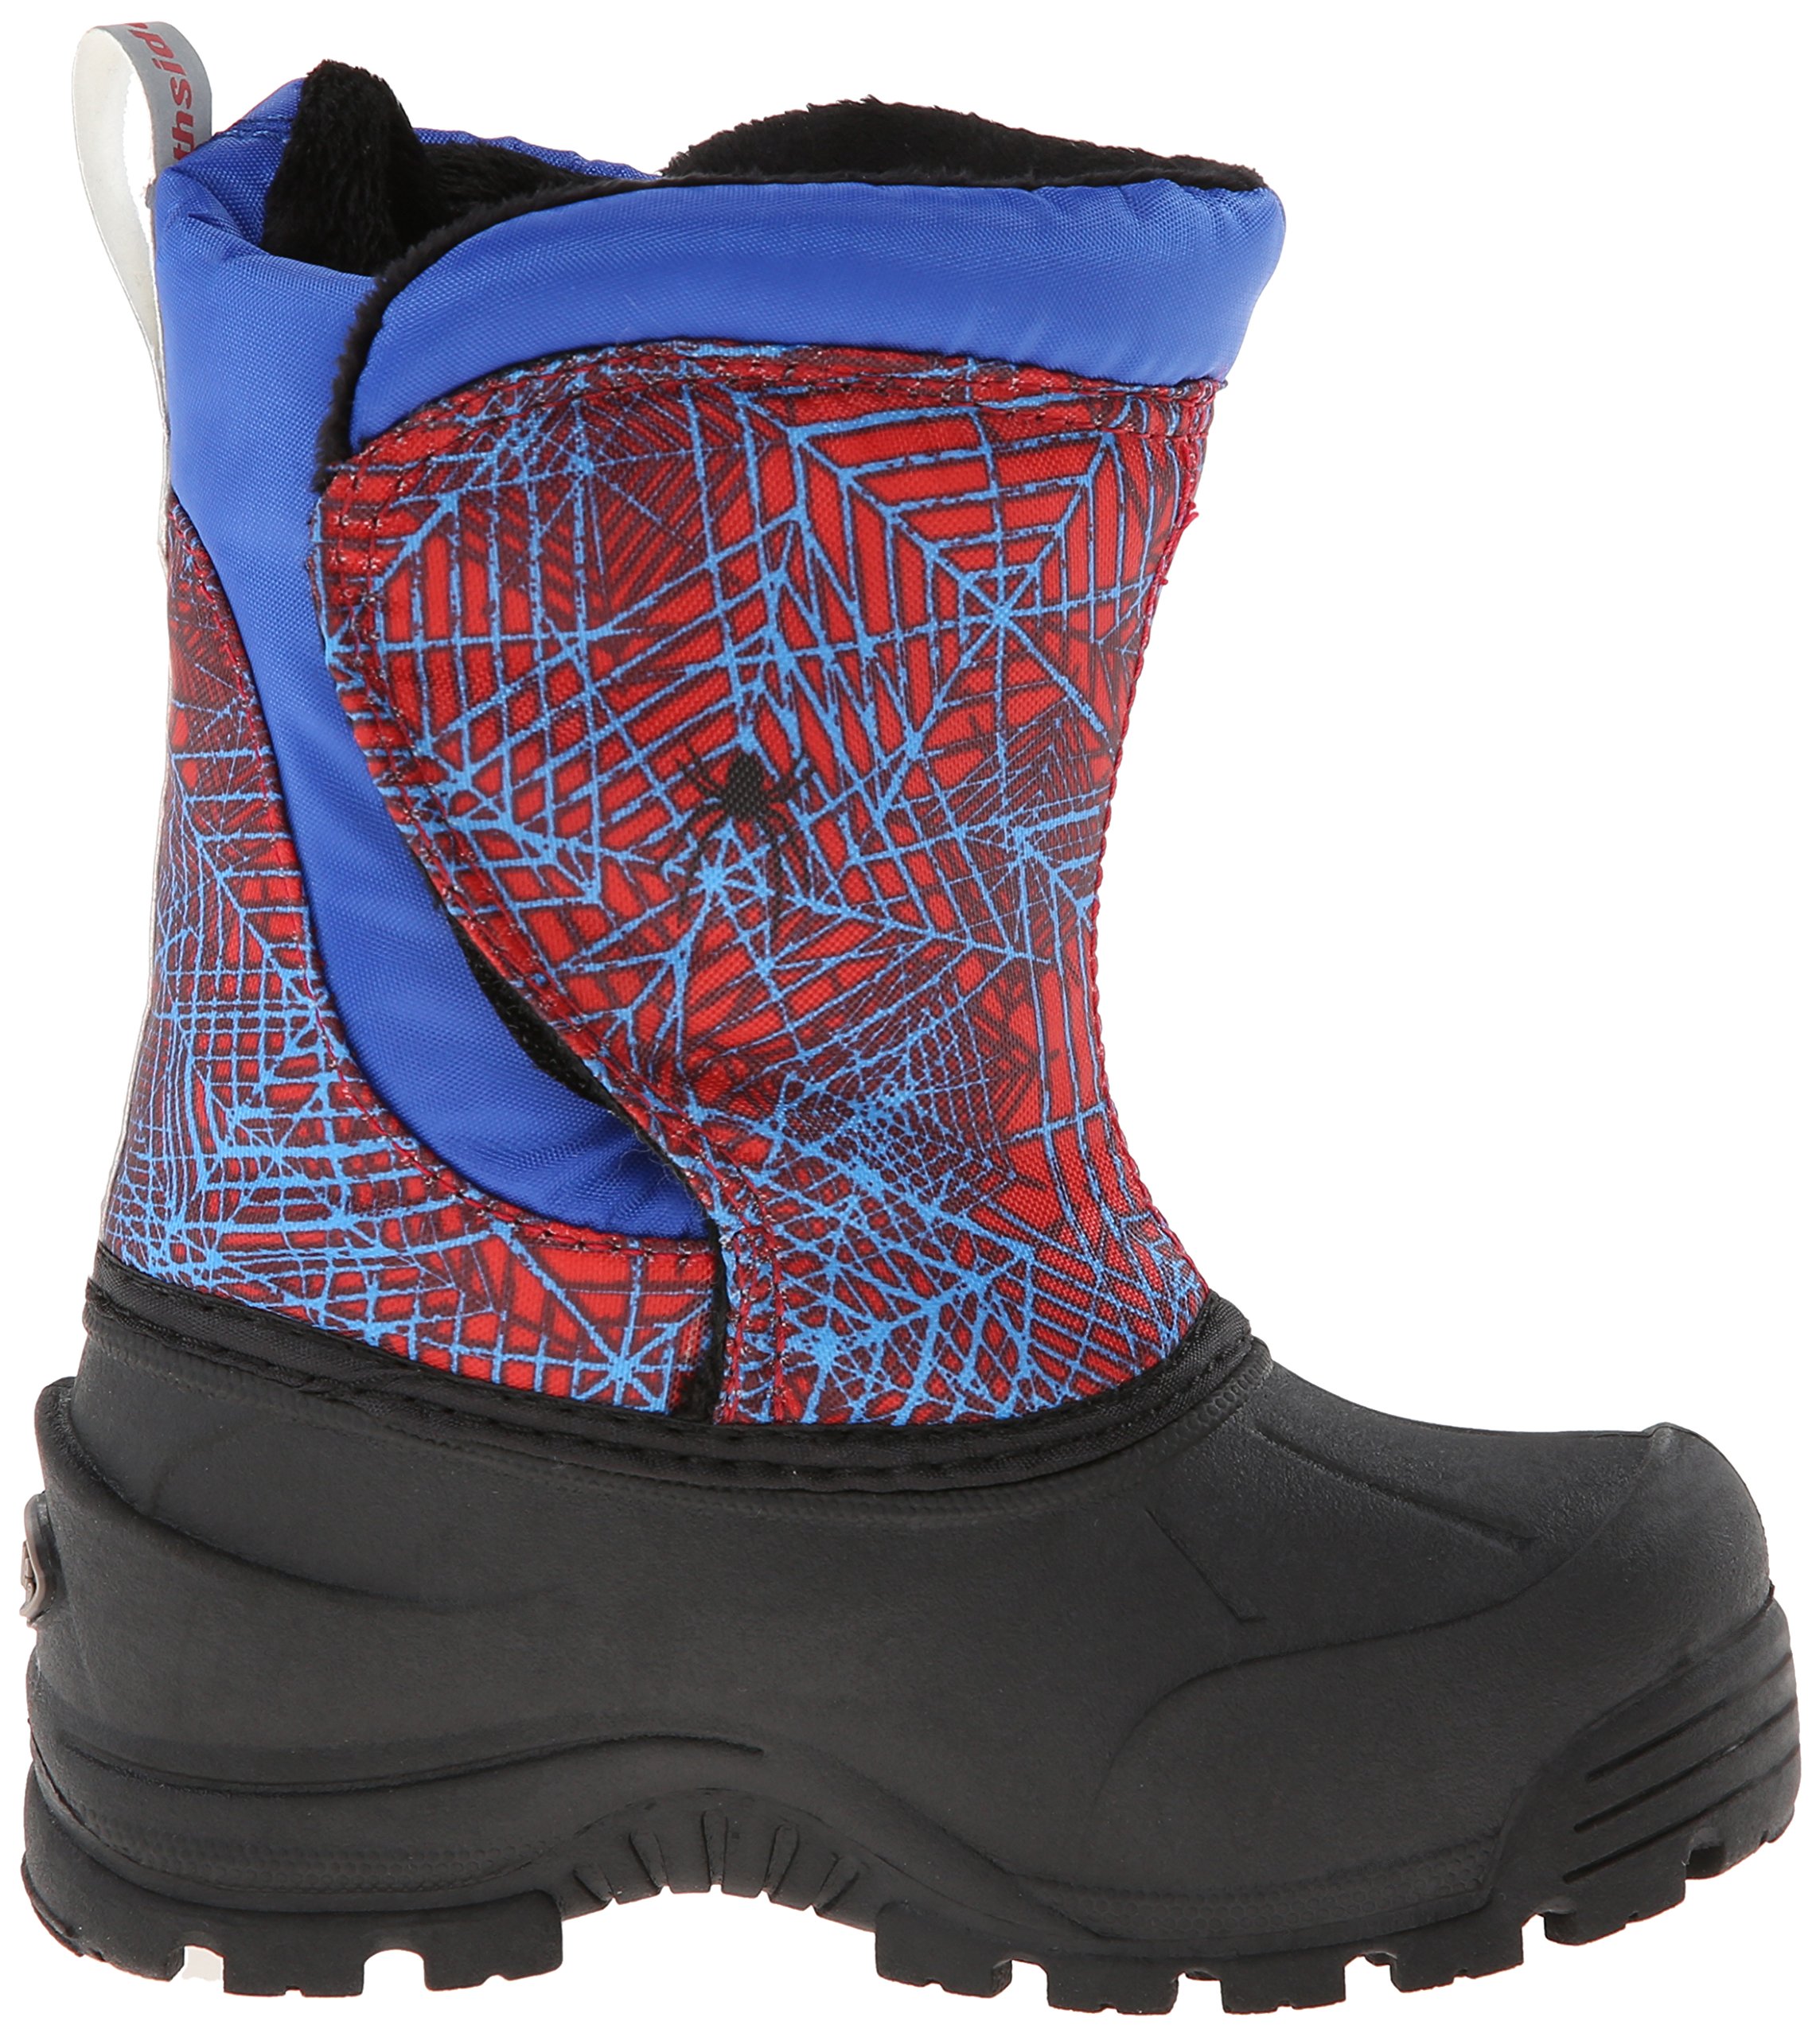 Northside Snoqualmie Winter Boot (Toddler)